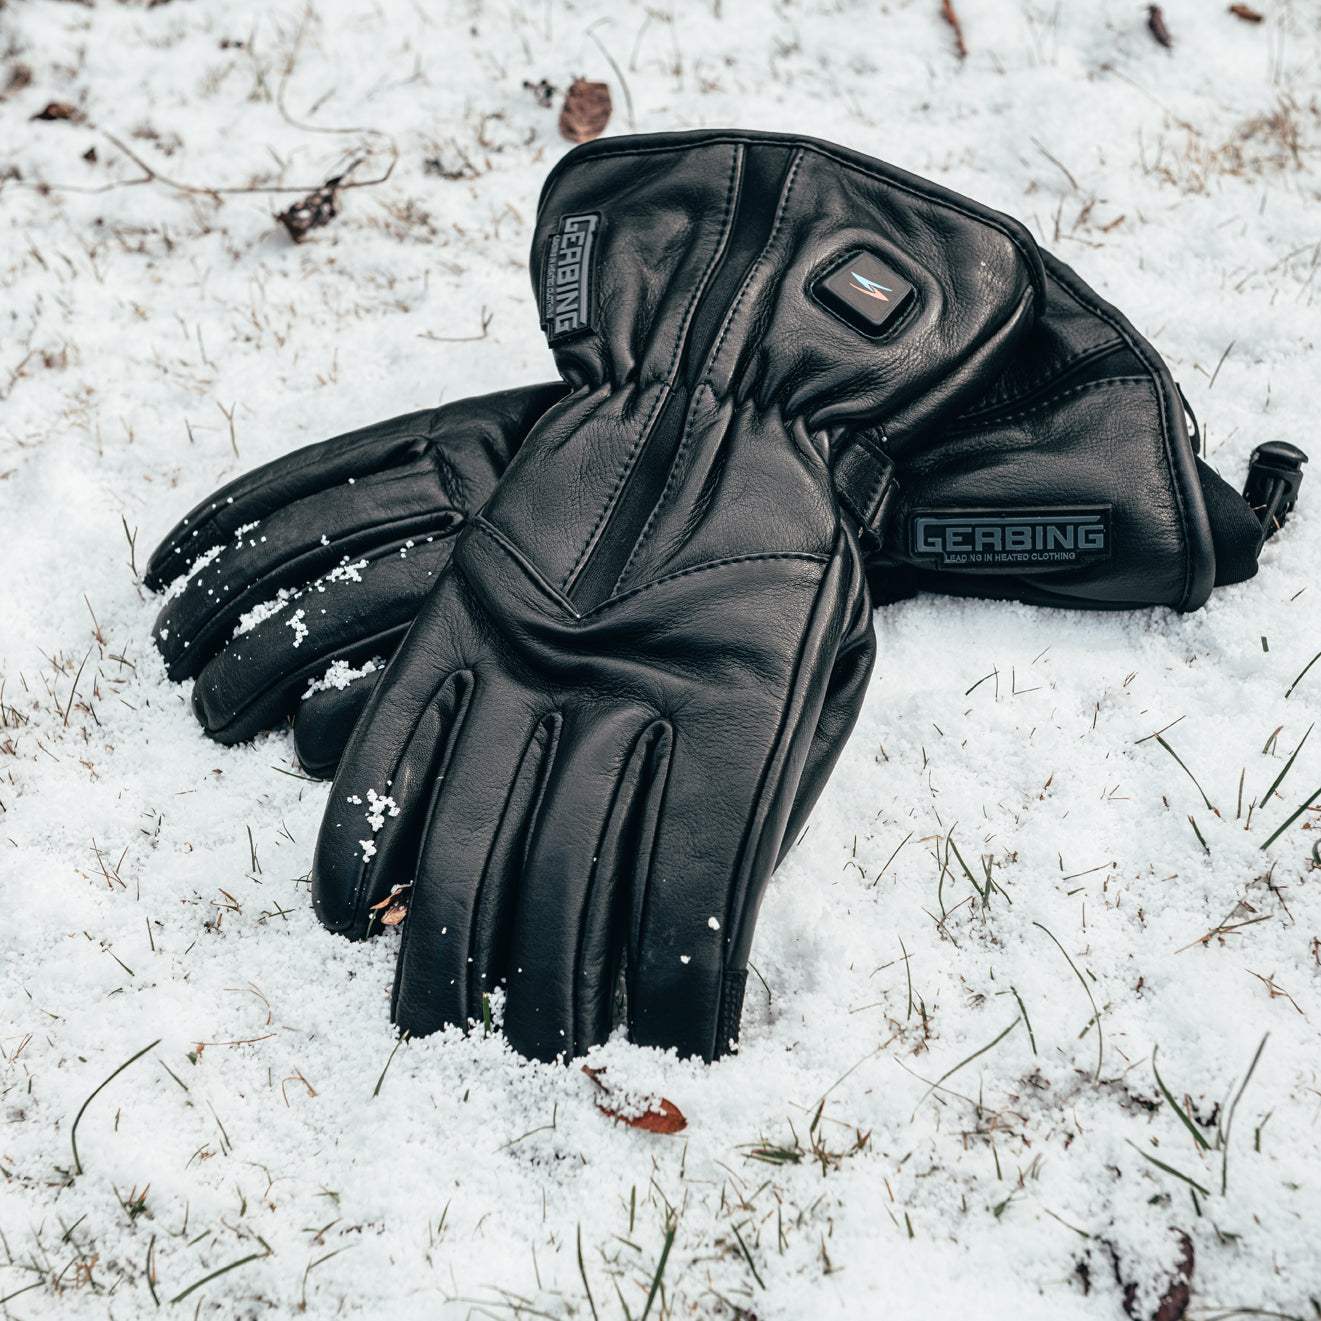 Gerbing Xtreme Heated GT Motorcycle Gloves